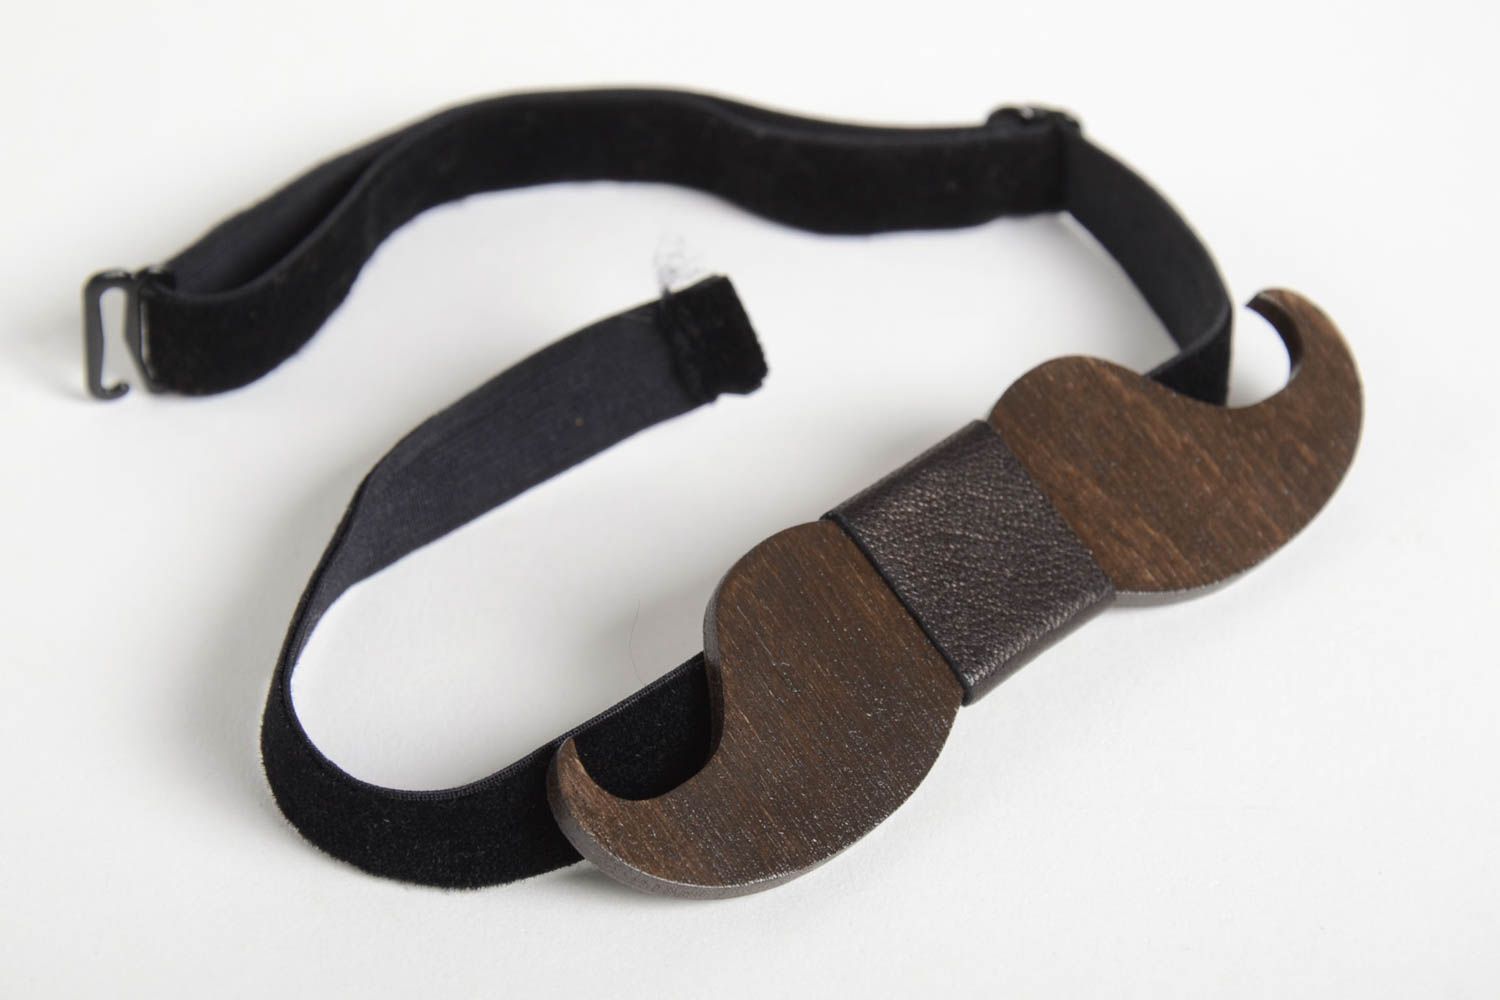 Handmade wooden bow tie accessories for men wooden gifts unique bow tie photo 5